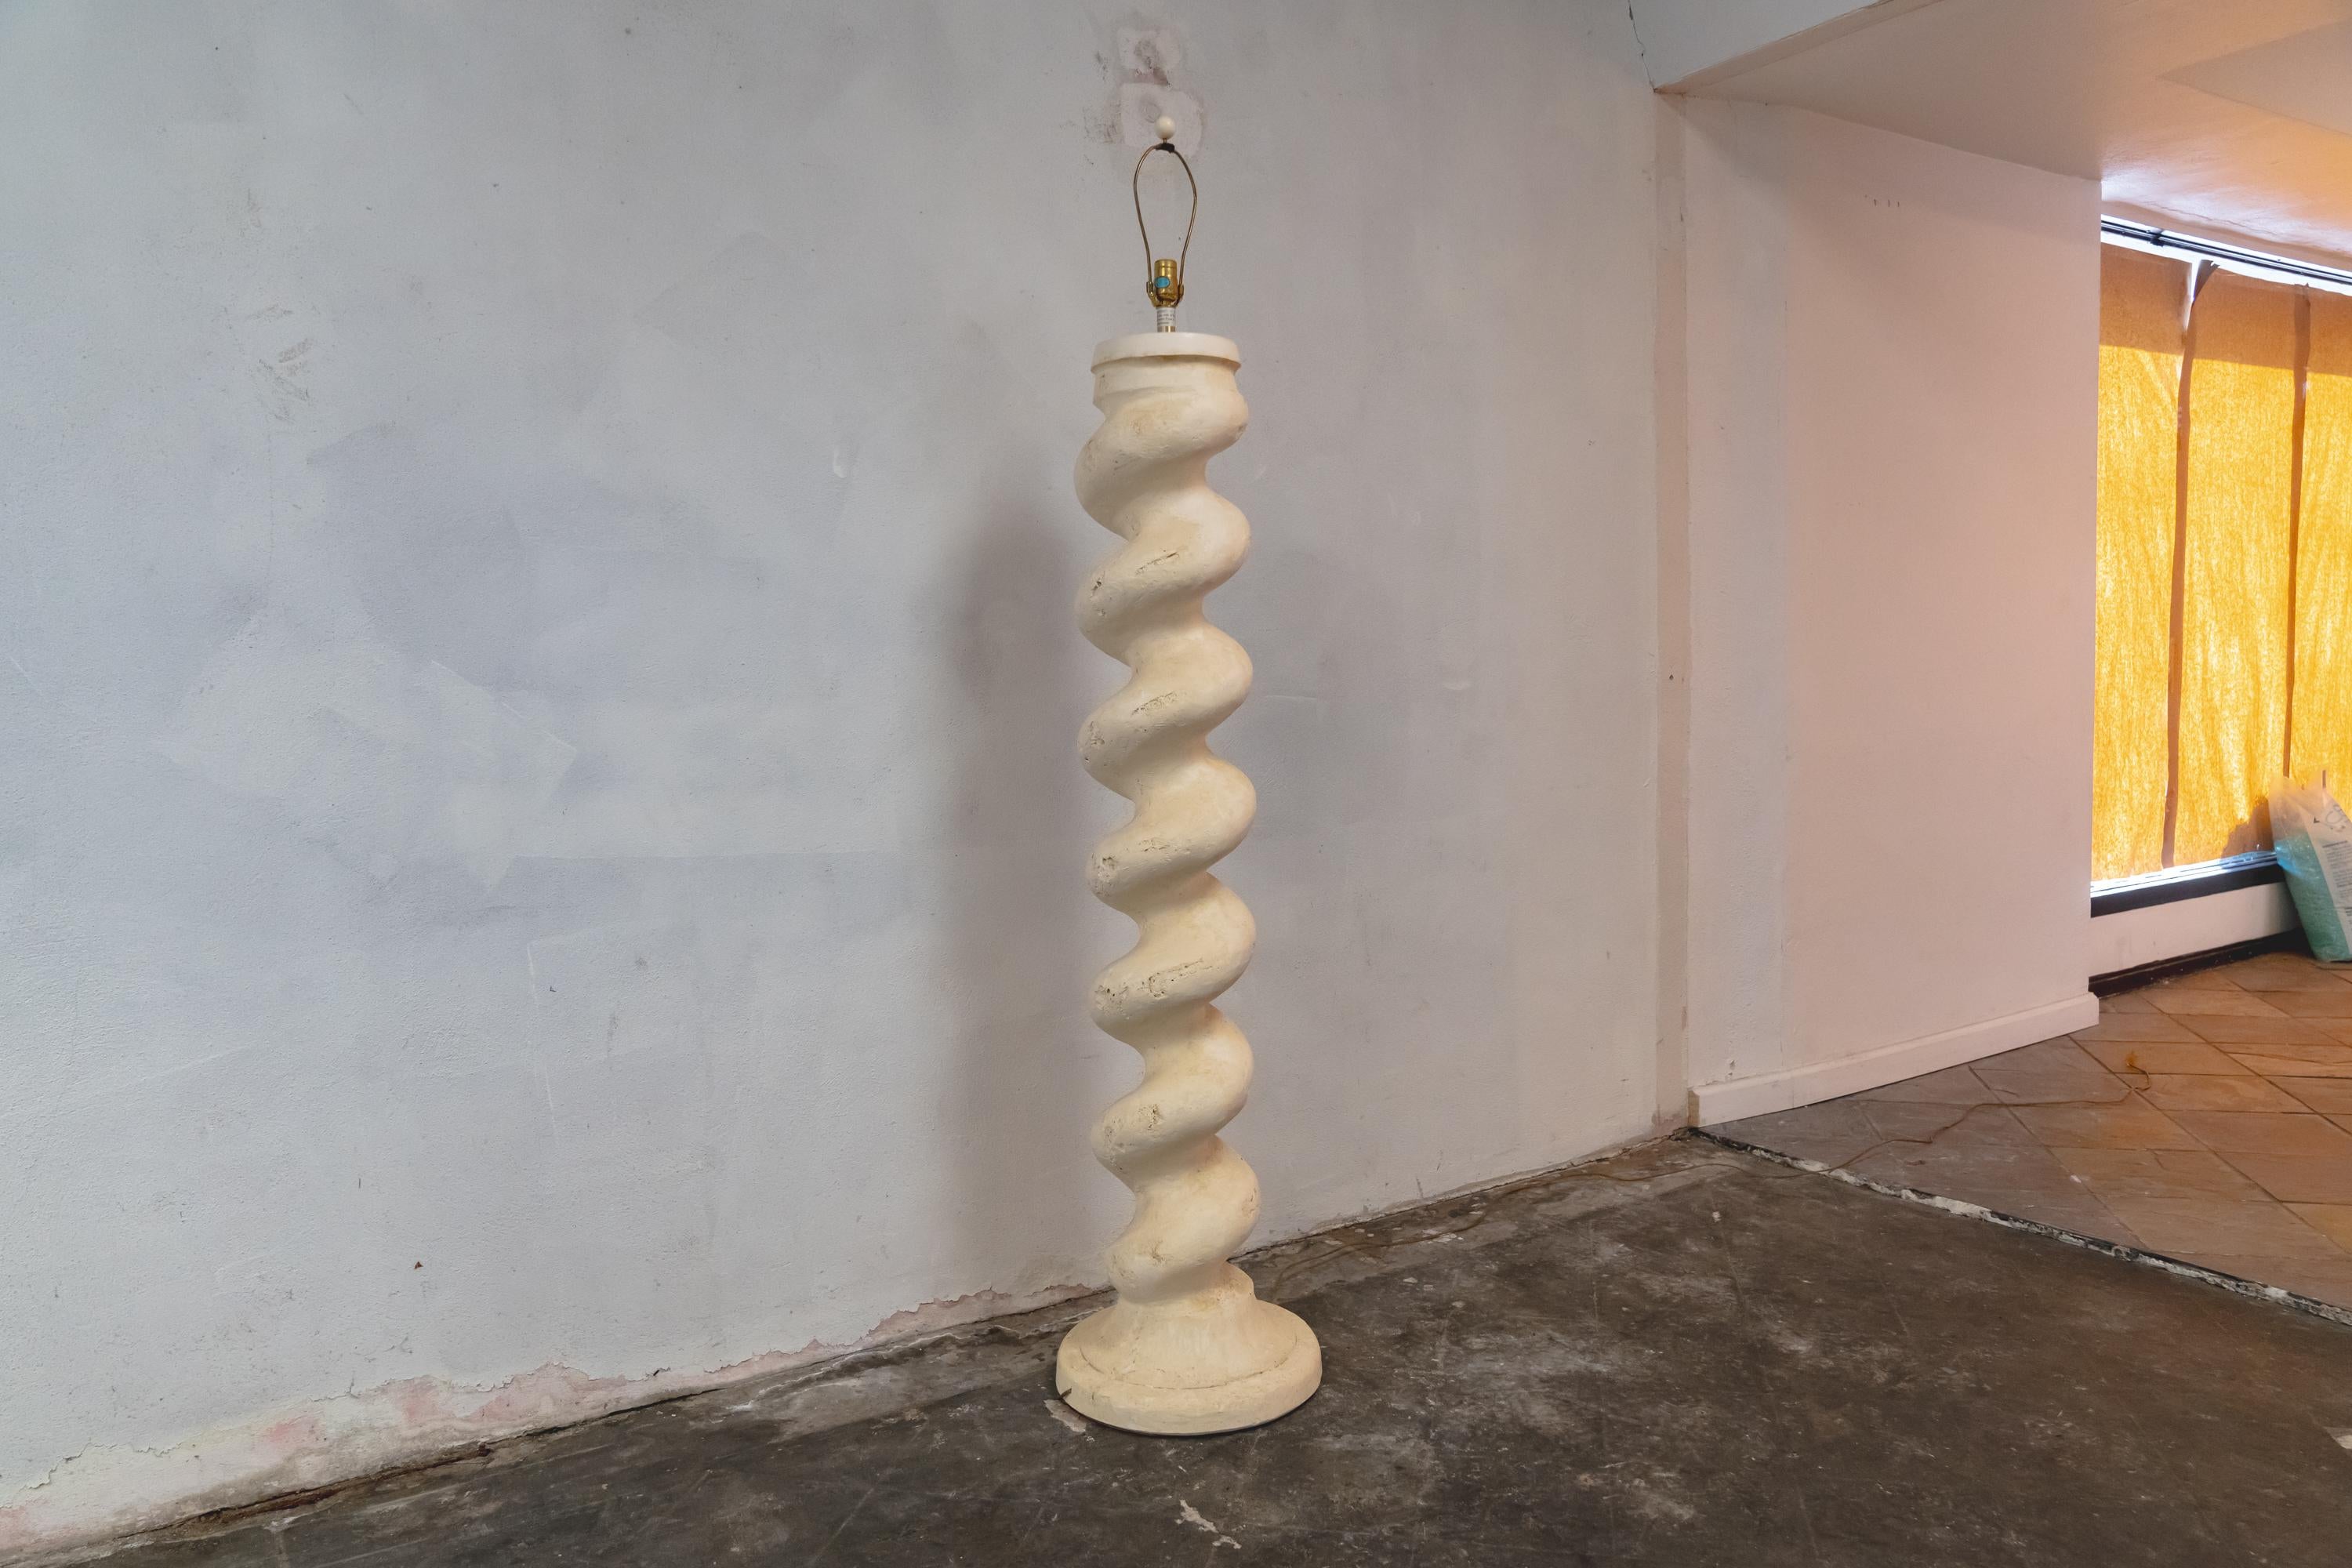 Remarkable and heavy solid plaster, spiral form floor lamp designed by Michael Taylor.
Curbside to NYC/Philly $350